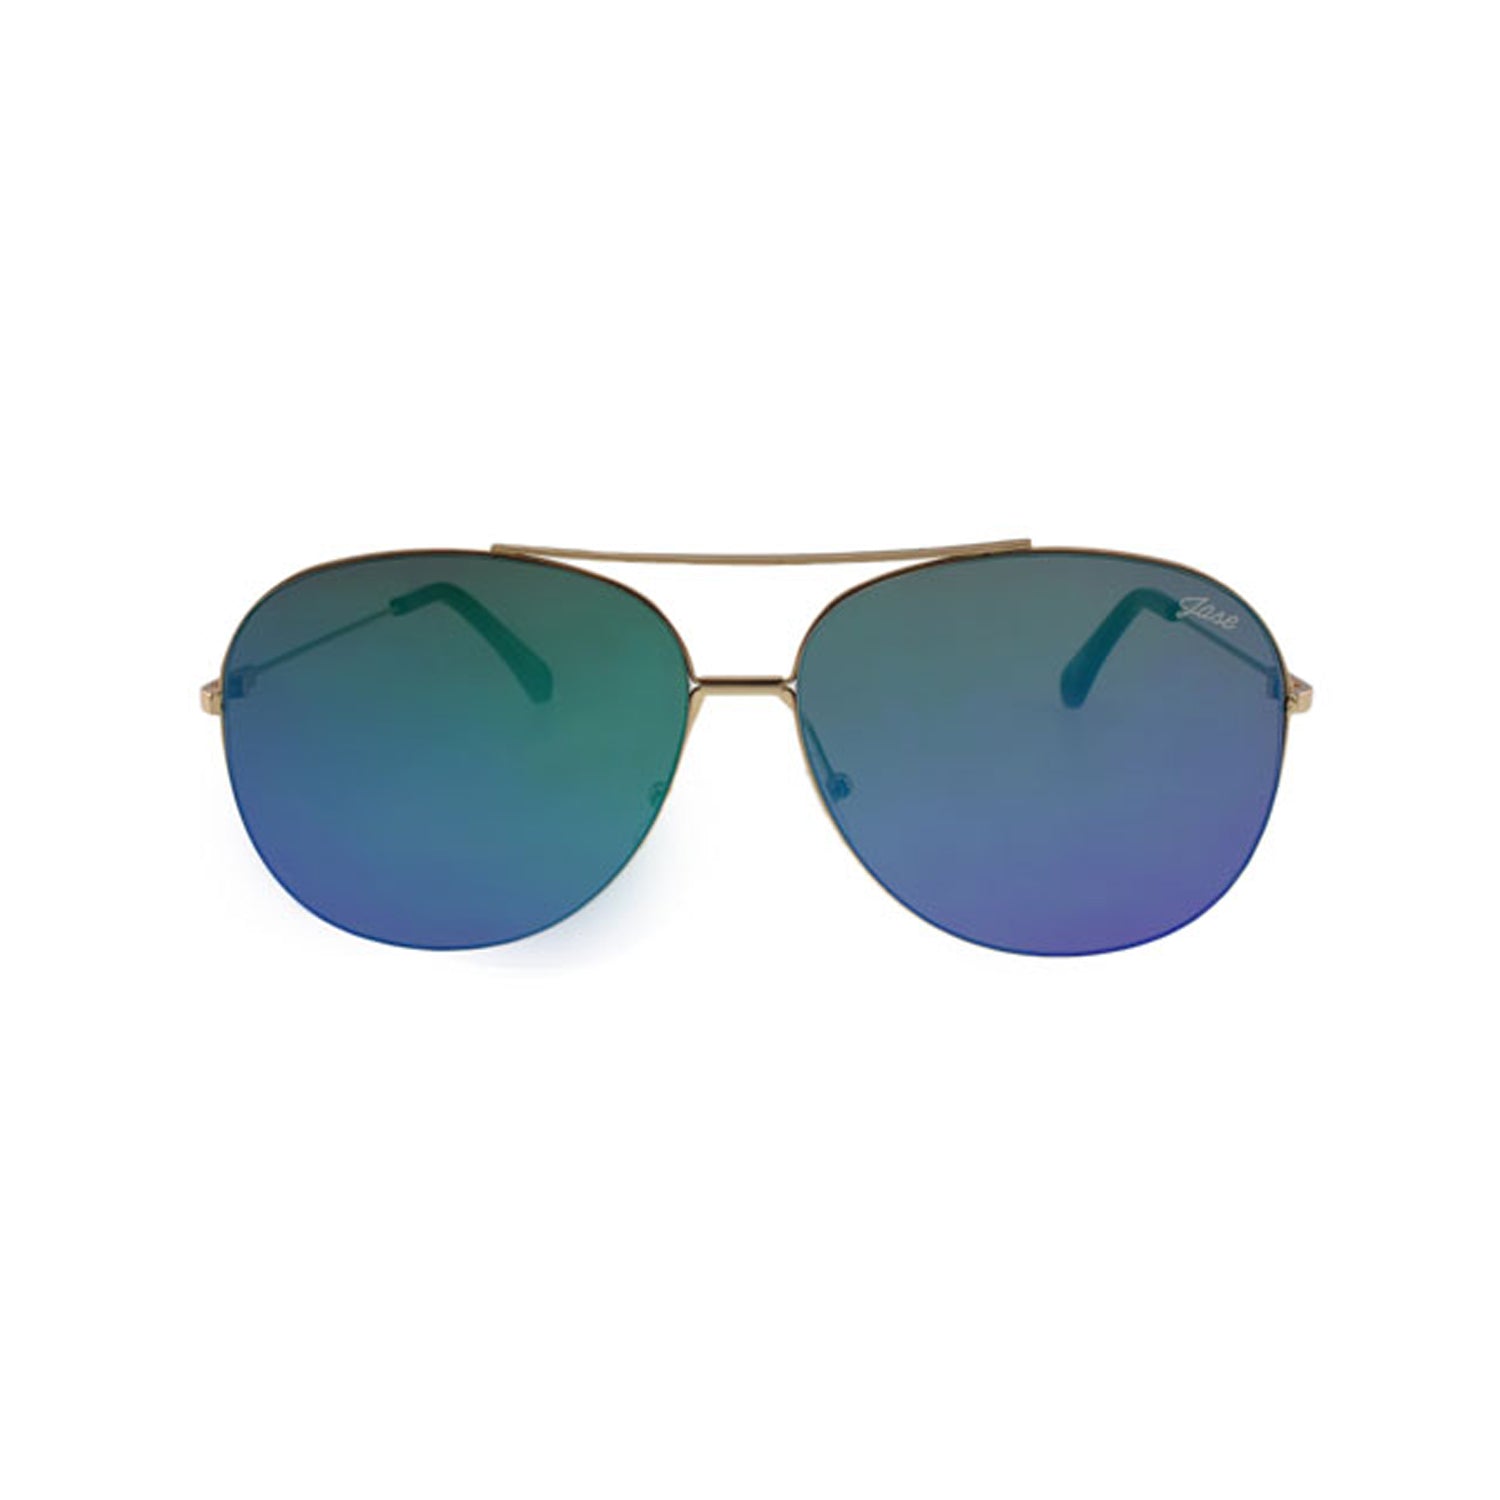 Jase New York Justice Sunglasses in Gold - Shop Luxurious57